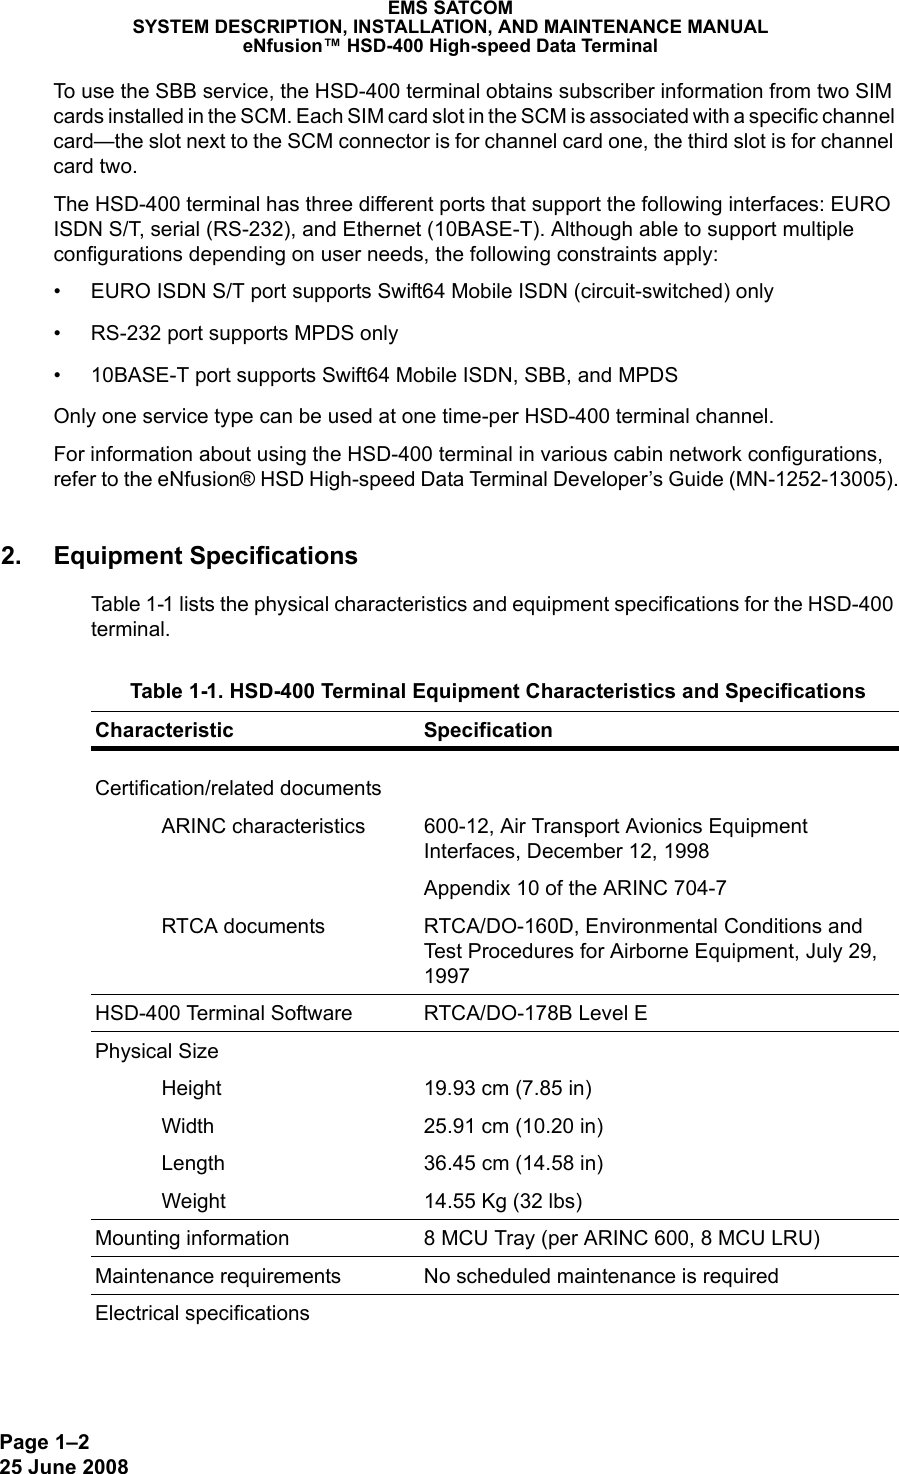 Page 1–225 June 2008 EMS SATCOMSYSTEM DESCRIPTION, INSTALLATION, AND MAINTENANCE MANUALeNfusion™ HSD-400 High-speed Data TerminalTo use the SBB service, the HSD-400 terminal obtains subscriber information from two SIM cards installed in the SCM. Each SIM card slot in the SCM is associated with a specific channel card—the slot next to the SCM connector is for channel card one, the third slot is for channel card two.The HSD-400 terminal has three different ports that support the following interfaces: EURO ISDN S/T, serial (RS-232), and Ethernet (10BASE-T). Although able to support multiple configurations depending on user needs, the following constraints apply:• EURO ISDN S/T port supports Swift64 Mobile ISDN (circuit-switched) only• RS-232 port supports MPDS only• 10BASE-T port supports Swift64 Mobile ISDN, SBB, and MPDS Only one service type can be used at one time-per HSD-400 terminal channel. For information about using the HSD-400 terminal in various cabin network configurations, refer to the eNfusion® HSD High-speed Data Terminal Developer’s Guide (MN-1252-13005).2. Equipment SpecificationsTable 1-1 lists the physical characteristics and equipment specifications for the HSD-400 terminal. Table 1-1. HSD-400 Terminal Equipment Characteristics and Specifications Characteristic SpecificationCertification/related documentsARINC characteristics 600-12, Air Transport Avionics Equipment Interfaces, December 12, 1998Appendix 10 of the ARINC 704-7RTCA documents RTCA/DO-160D, Environmental Conditions and Test Procedures for Airborne Equipment, July 29, 1997HSD-400 Terminal Software RTCA/DO-178B Level EPhysical SizeHeight 19.93 cm (7.85 in)Width 25.91 cm (10.20 in)Length 36.45 cm (14.58 in)Weight 14.55 Kg (32 lbs)Mounting information 8 MCU Tray (per ARINC 600, 8 MCU LRU)Maintenance requirements No scheduled maintenance is requiredElectrical specifications